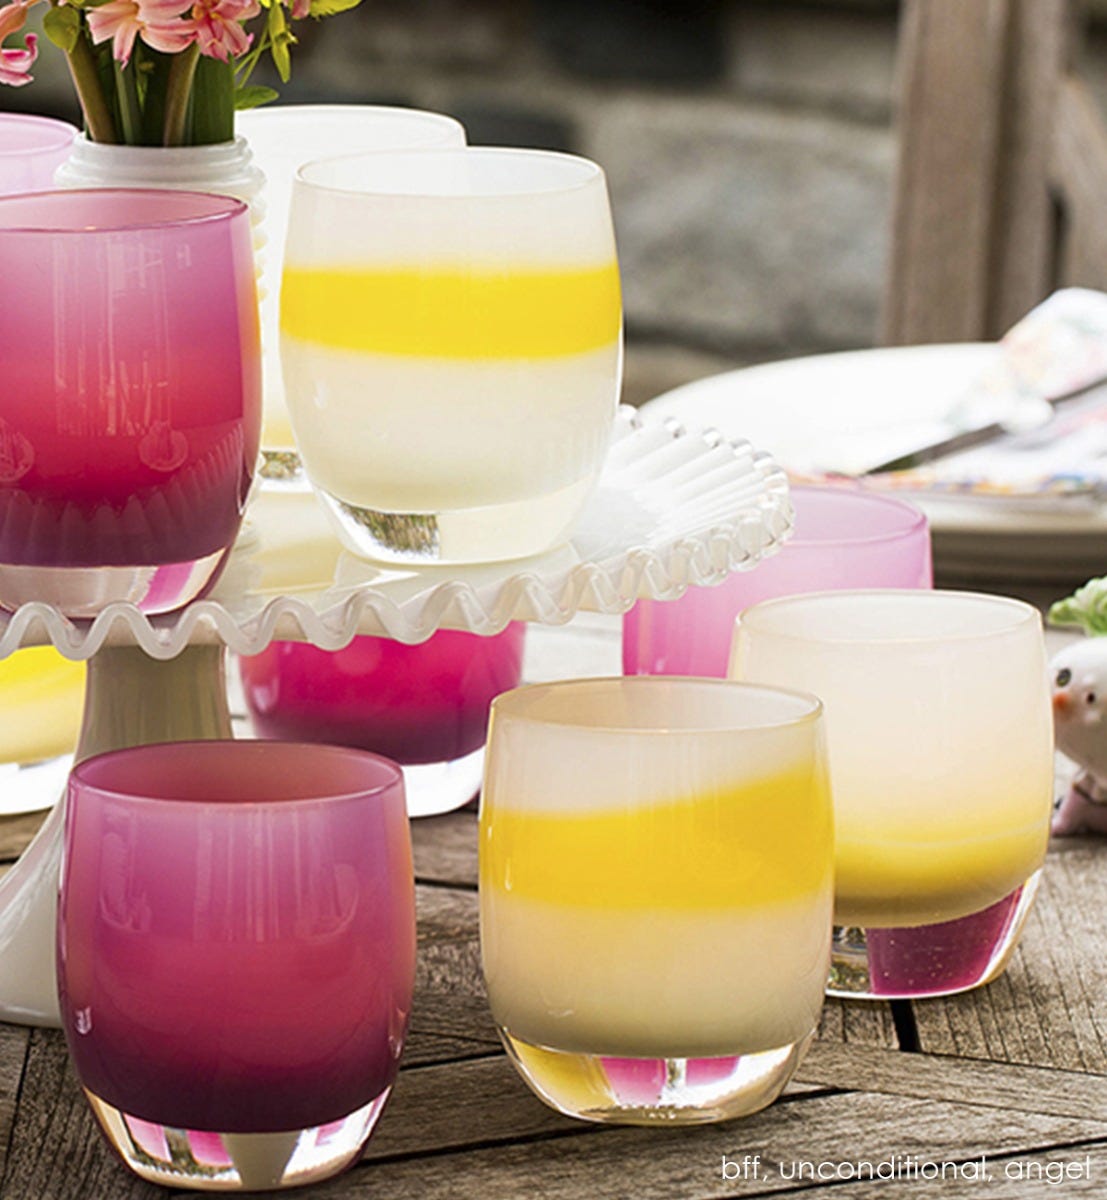 unconditional, white with yellow stripe, hand-blown glass votive candle holder. Paired with bff and angel.